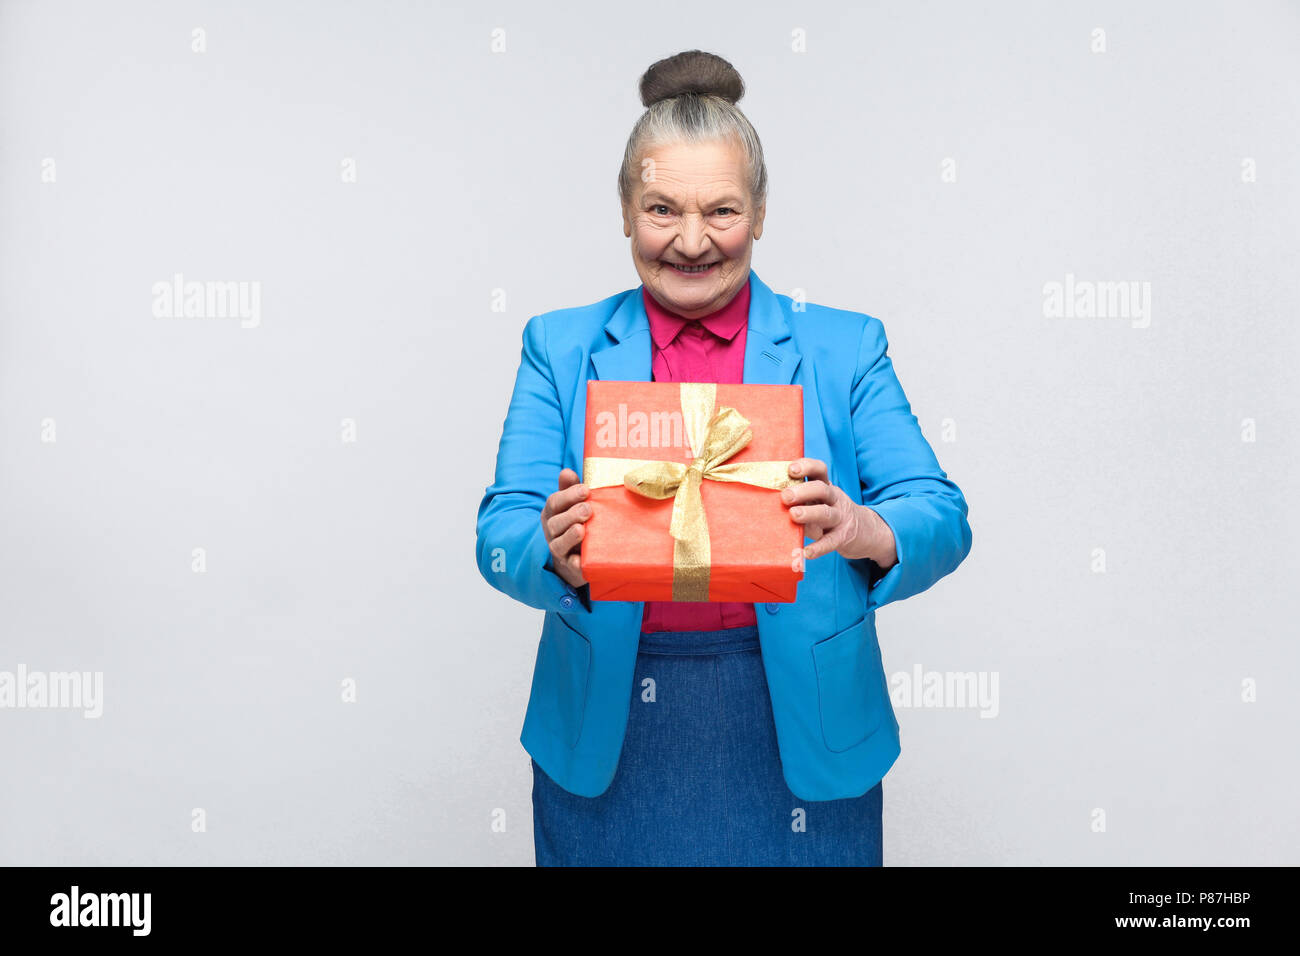 Happiness woman holding red gift box and toothy smiling. Portrait of handsome expressive grandmother in light blue suit with collected gray hair bun h Stock Photo